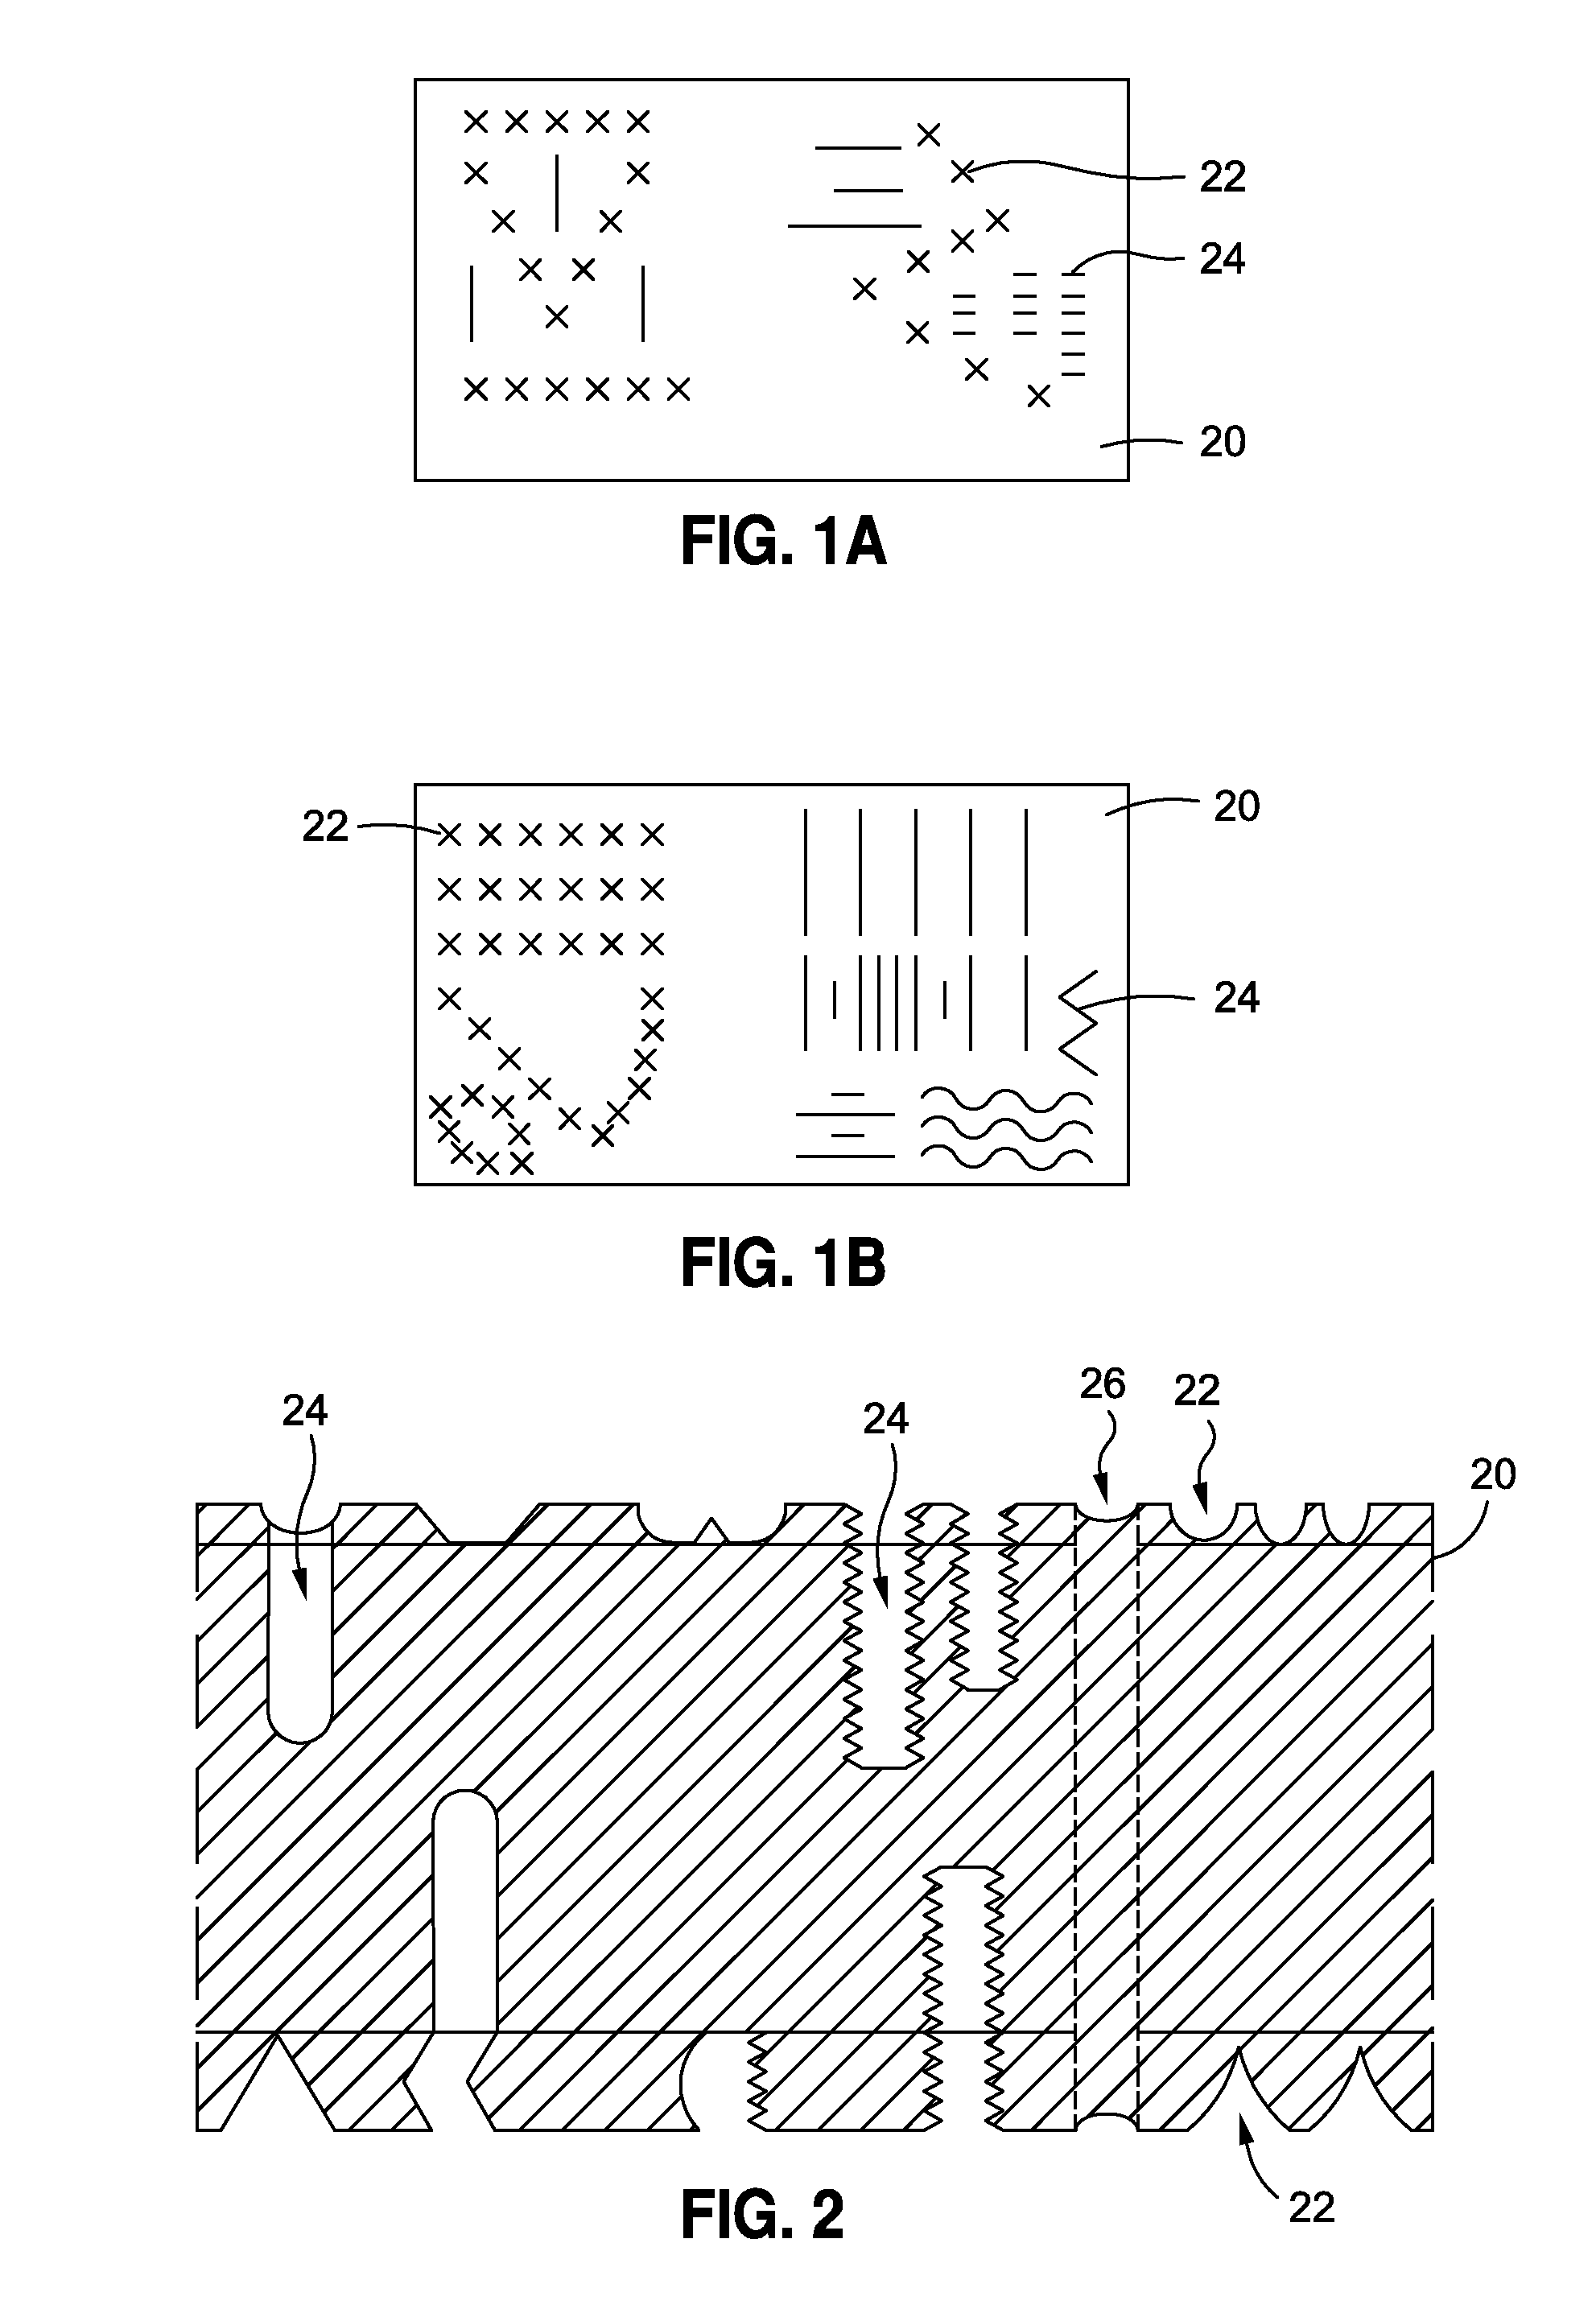 Method and apparatus for a process creating an internal tissue graft for animal and human reconstructive purposes